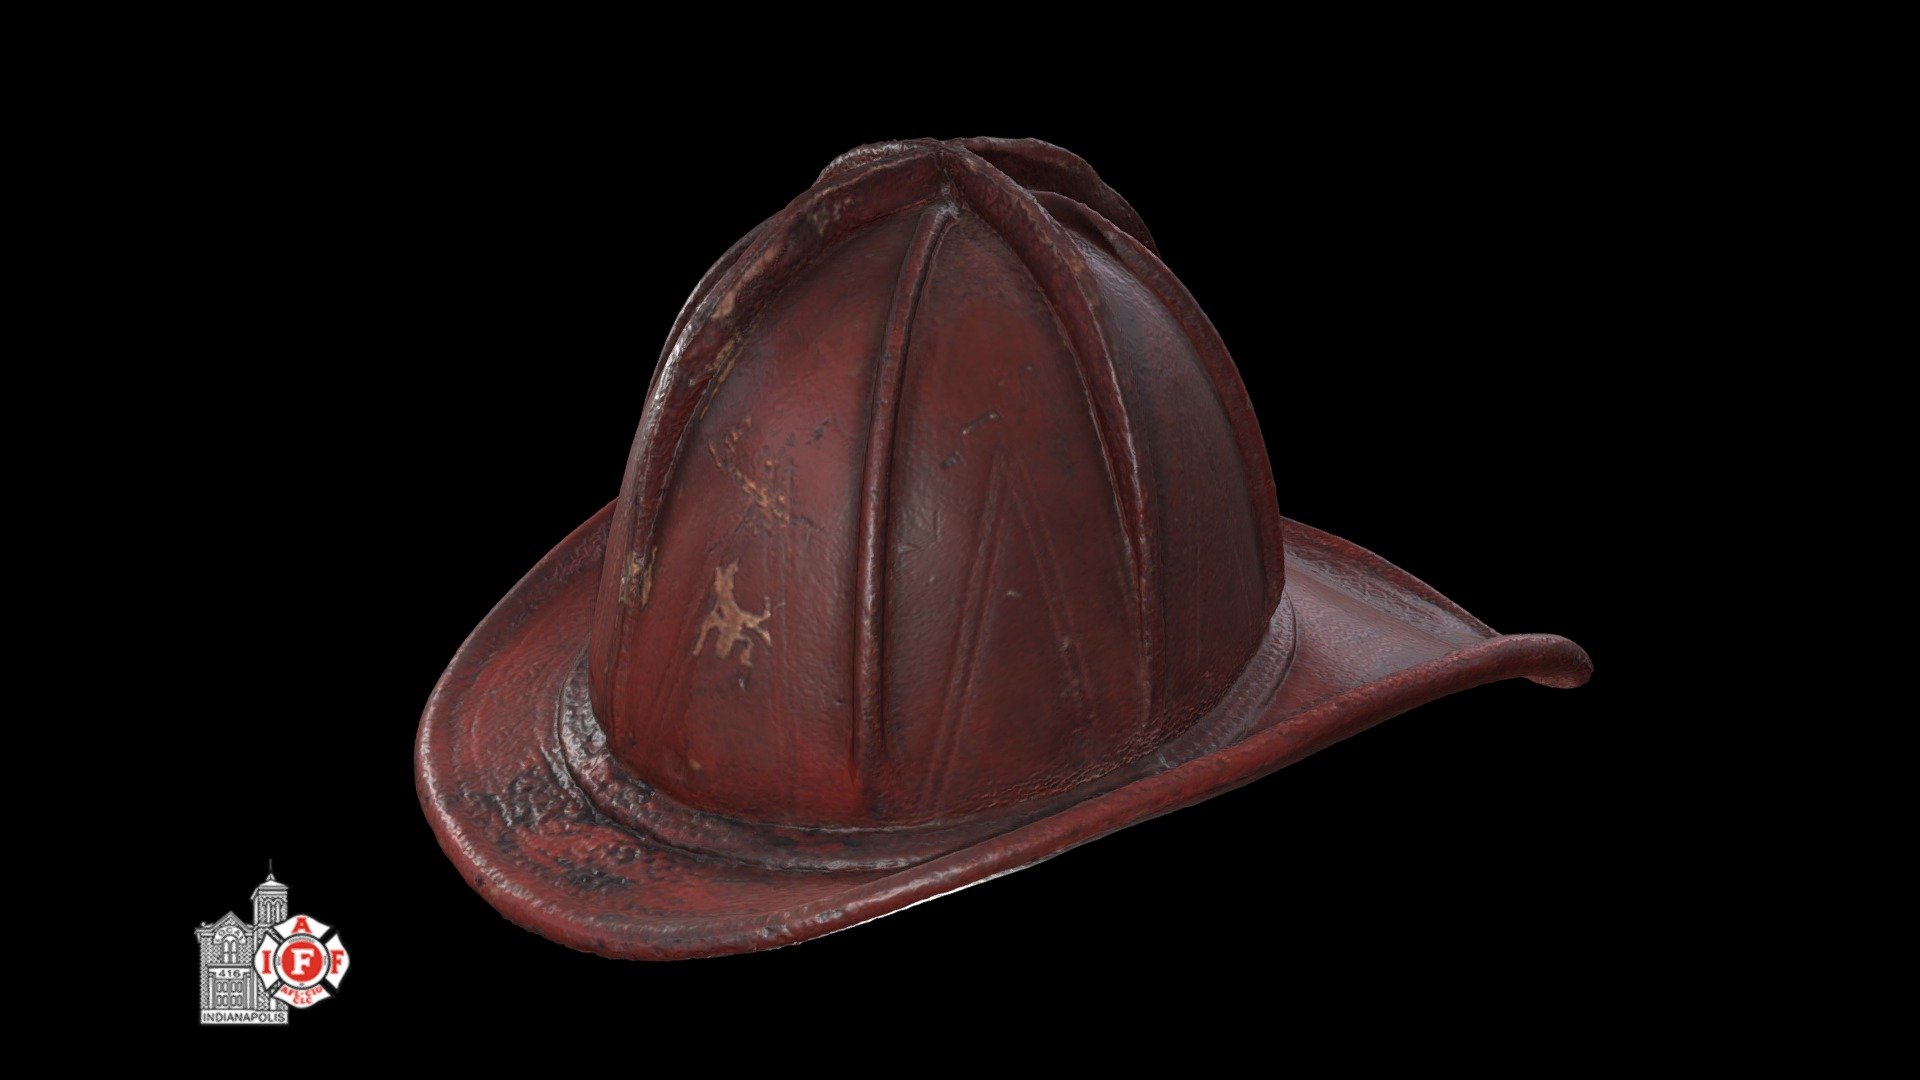 One of the oldest helmets in our collection, Many photos from the 1920's seemed to be leather and did not have shields on the front indicating what company it was from. Circa 1920's. Leather Helmet, is apart of the Indianapolis Fire Fighters Museum collection.

This item was 3D scanned using a Creaform Go Scan 50.

For more information about this object, feel free to visit: https://www.visitindy.com/indianapolis-firefighters-museum-historical-society

For more information about the 3D Digitization Program at IUPUI visit: https://www.ulib.iupui.edu/digitalscholarship/3ddig - Leather Helmet - Download Free 3D model by Connections XR (@connectionsxr) 3d model